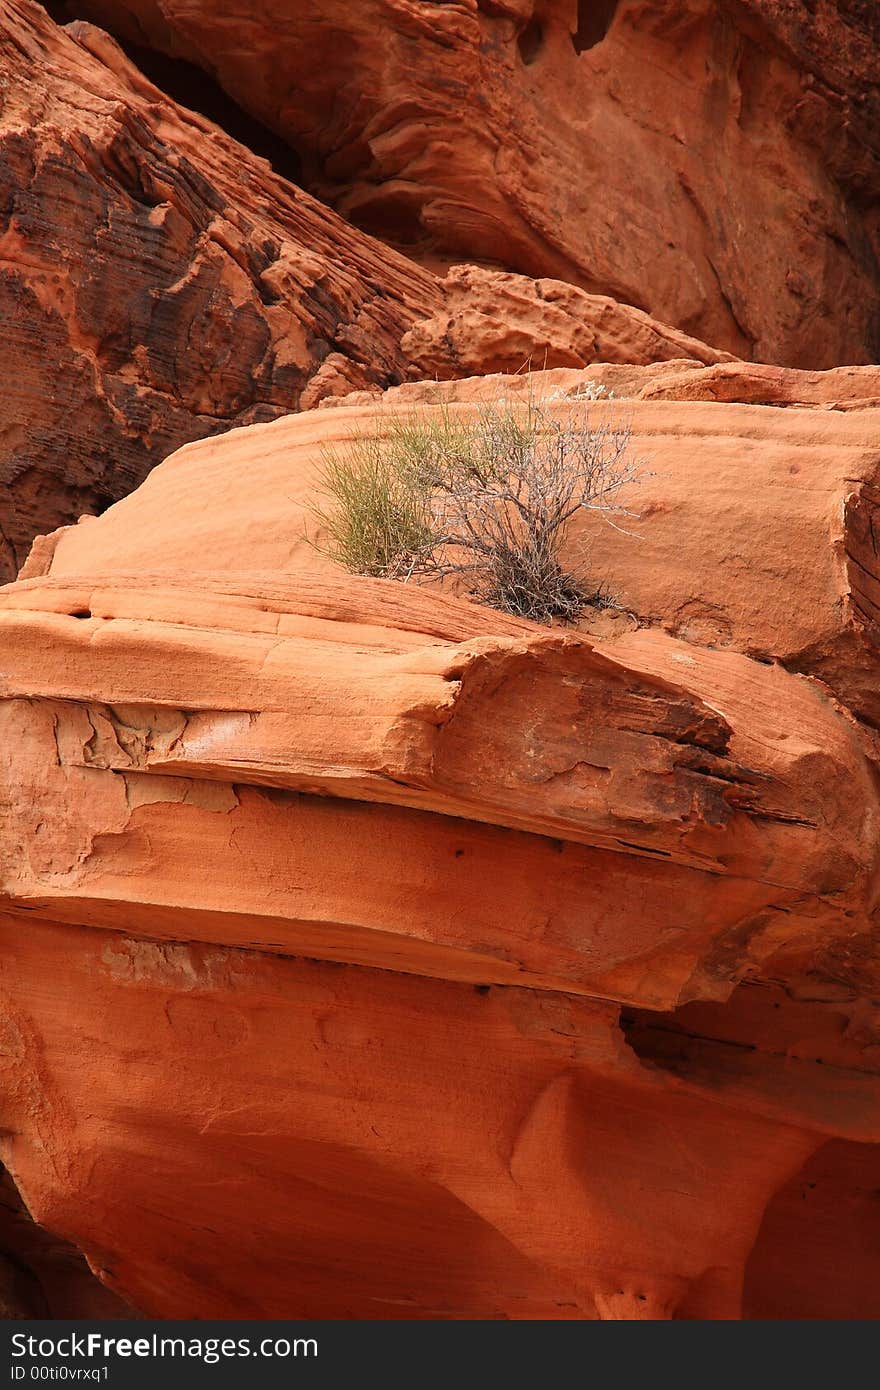 Rock formation in the Valley of Fire in Nevada